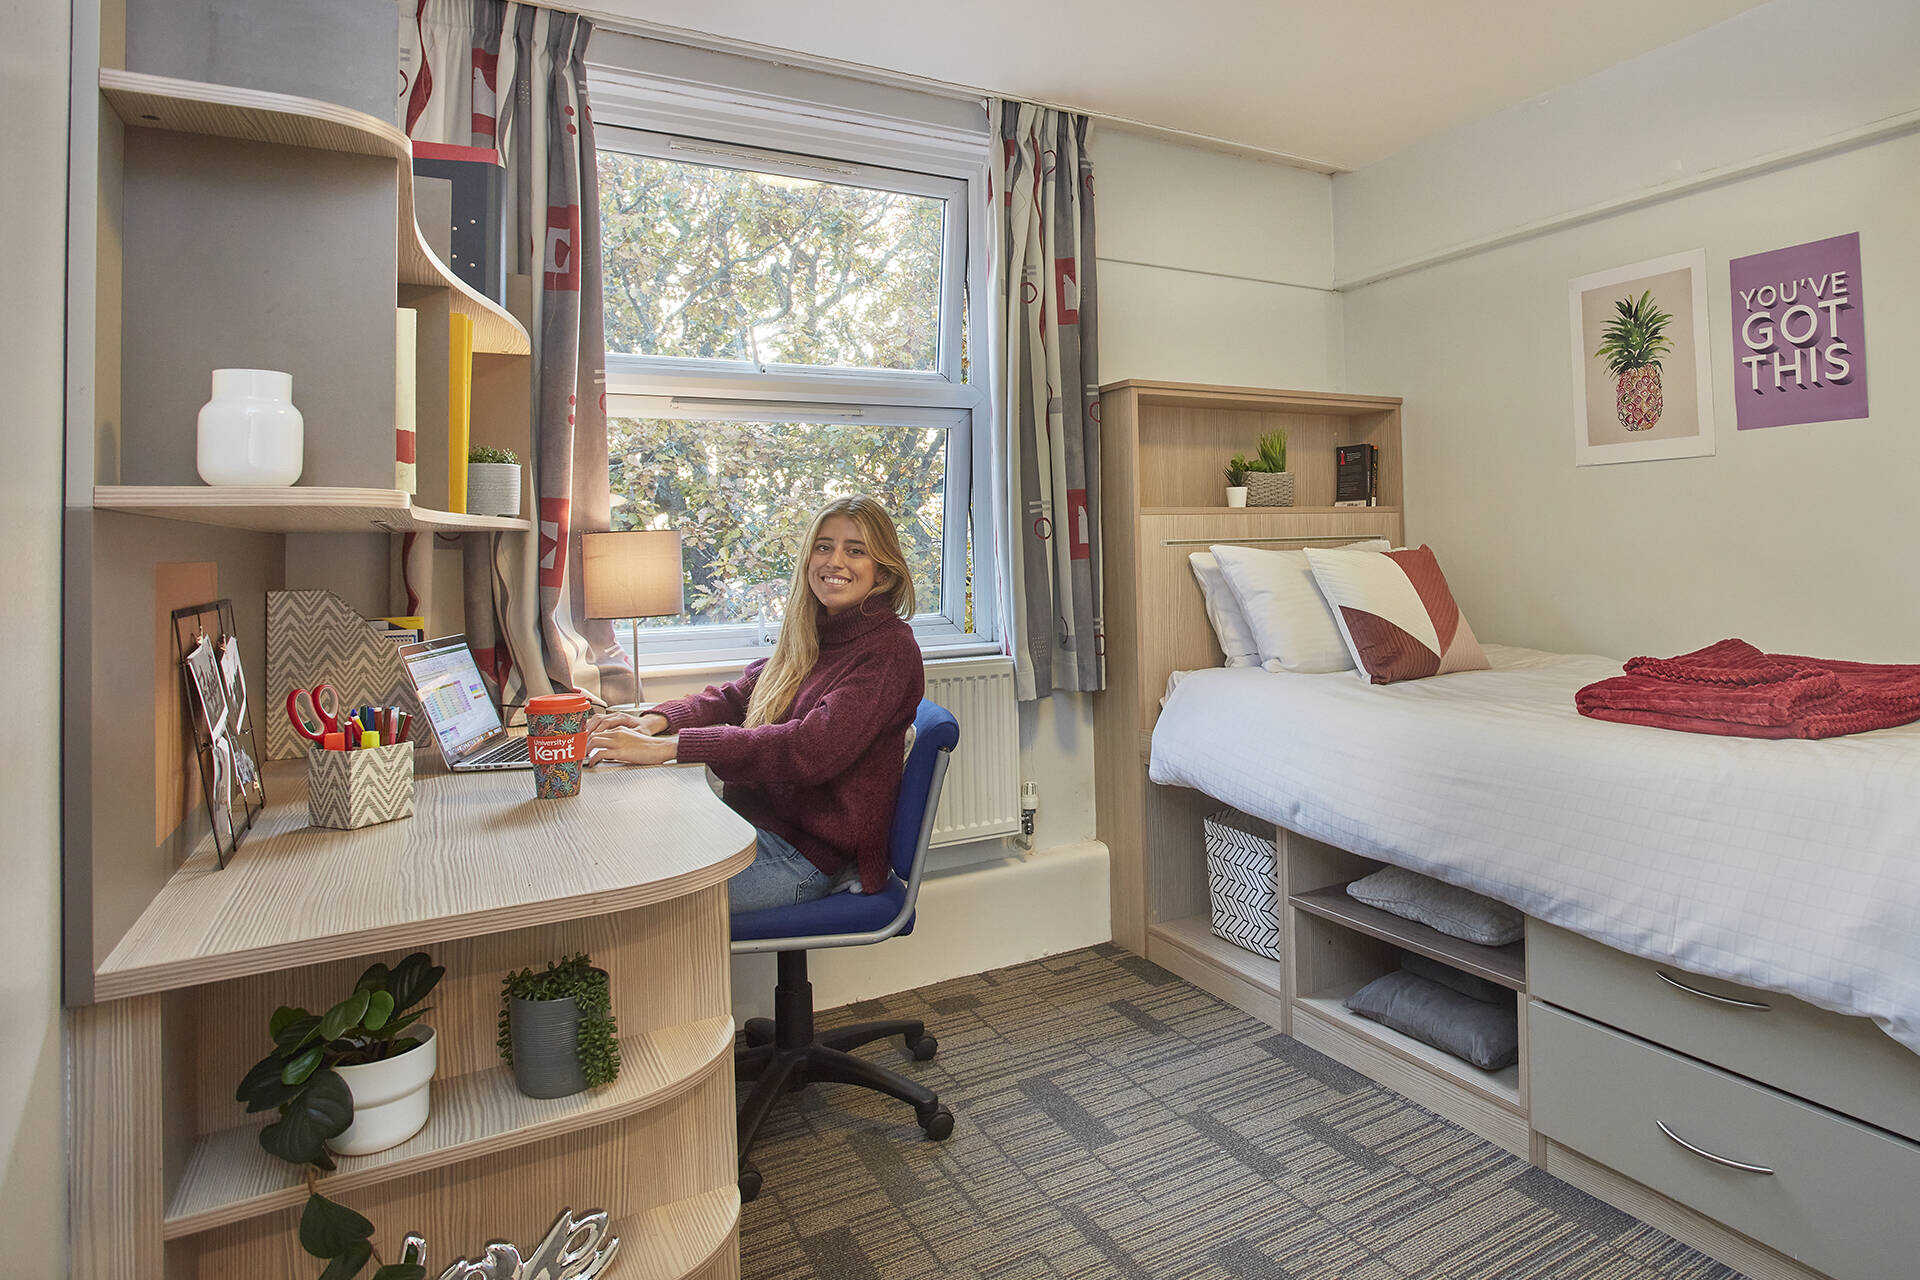 Student in a study bedroom